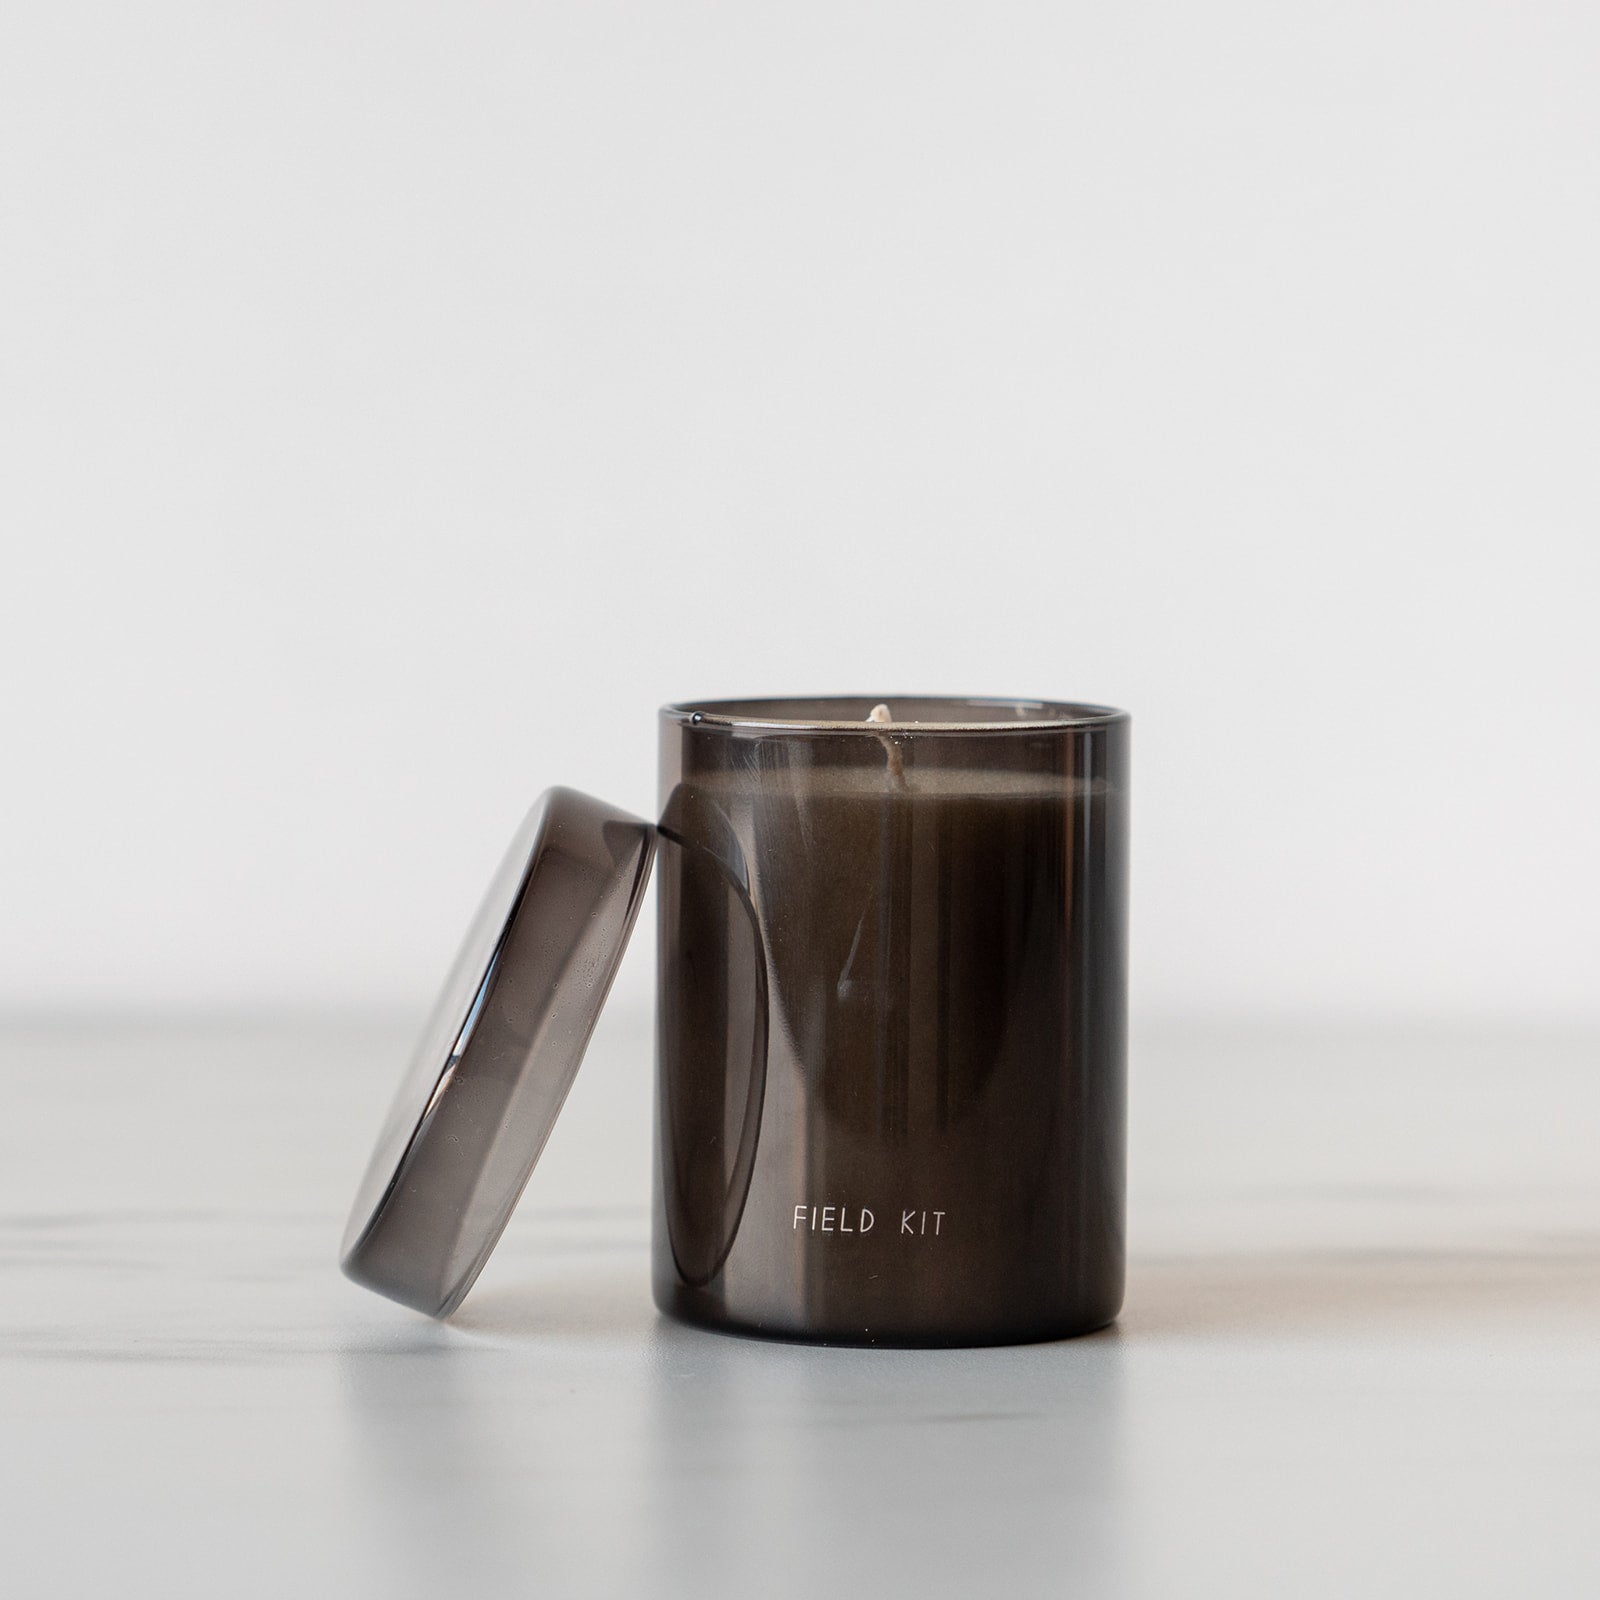 "The Home" Glass Candle by Field Kit - Rug & Weave